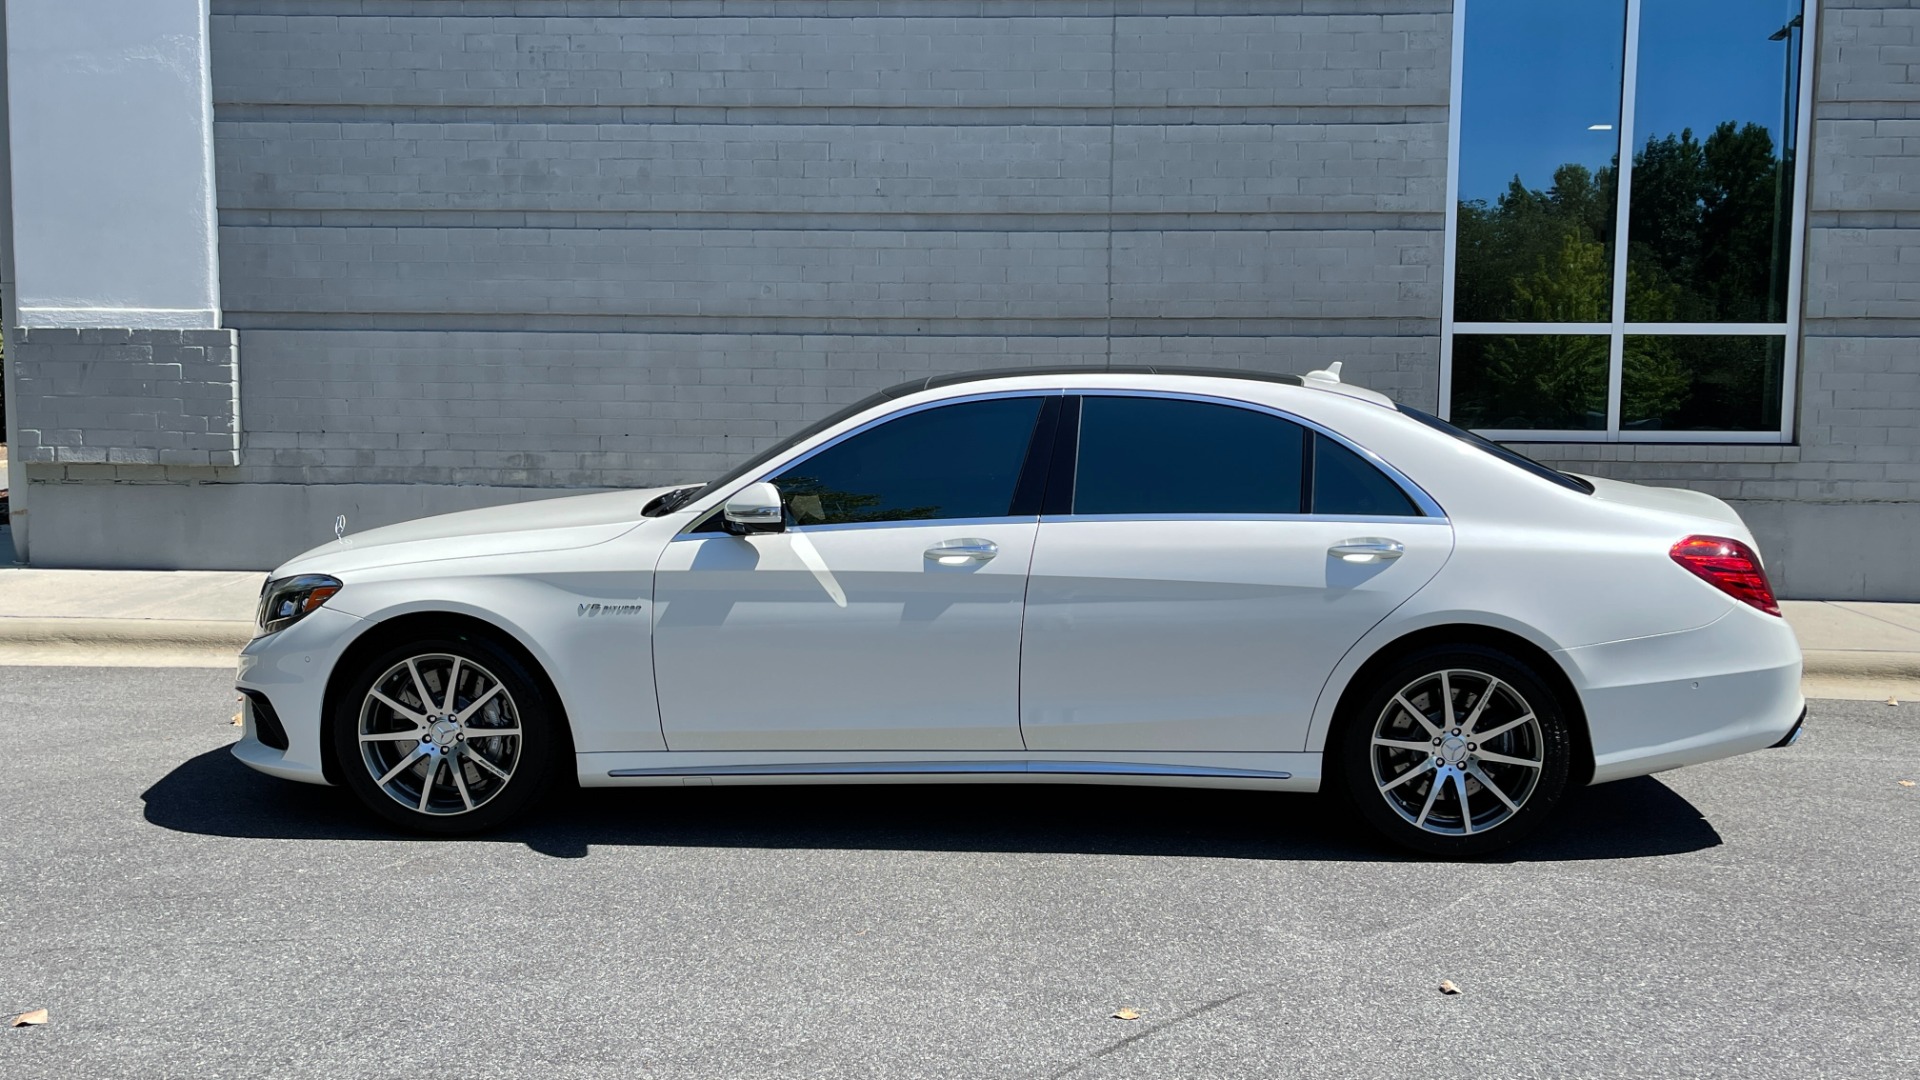 Used 2016 Mercedes-Benz S-Class AMG S63 / EXCLUSIVE TRIM / BURMESTER 3D HIGH END SOUND / DRIVER ASSISTANCE  for sale $68,995 at Formula Imports in Charlotte NC 28227 6